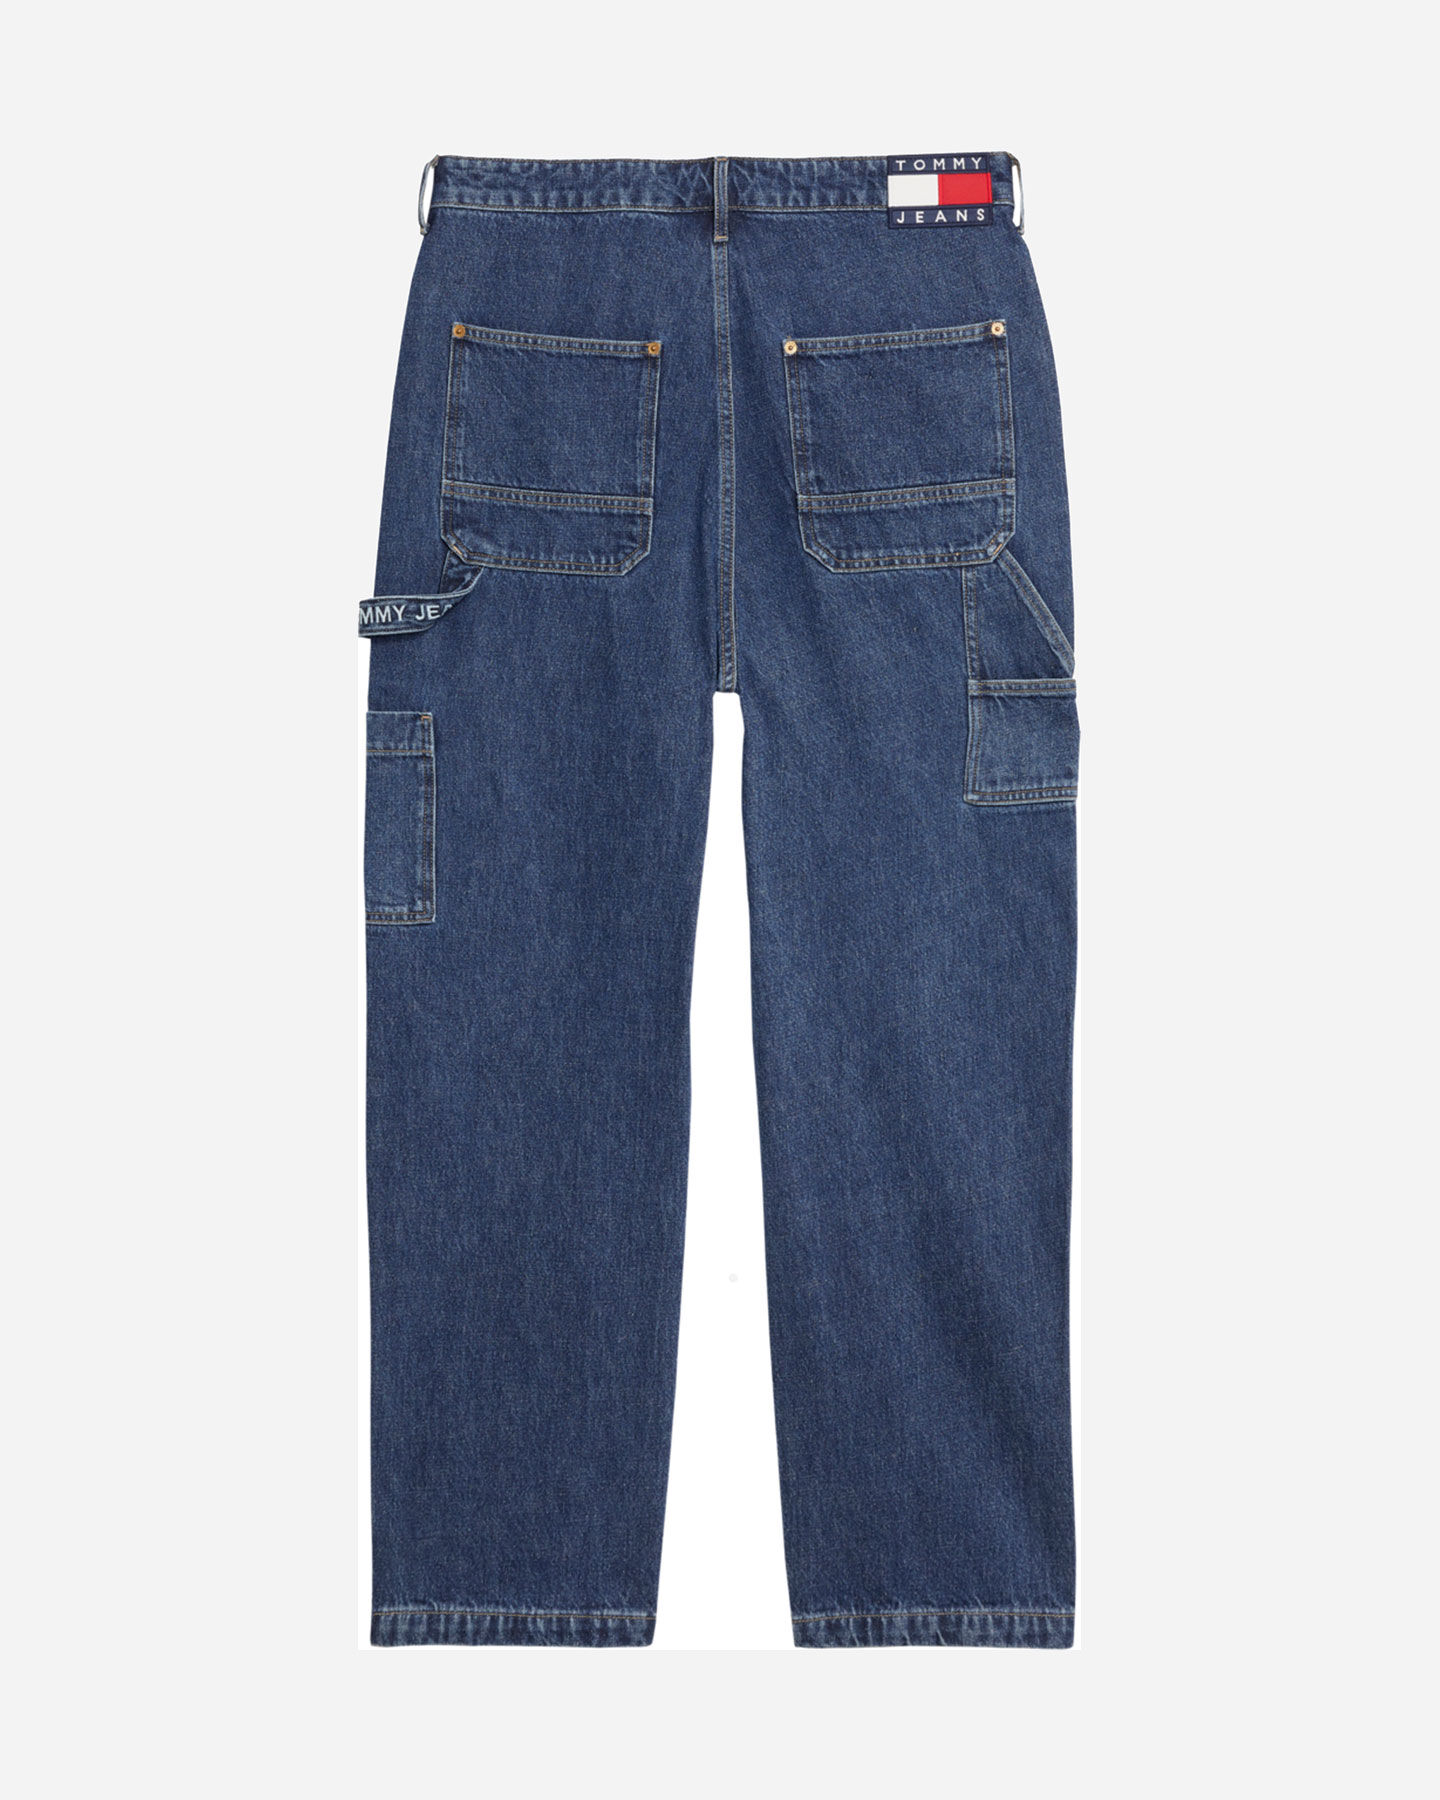  Jeans TOMMY HILFIGER SKATER MEDIUM M S4102749|1A5|29 scatto 1